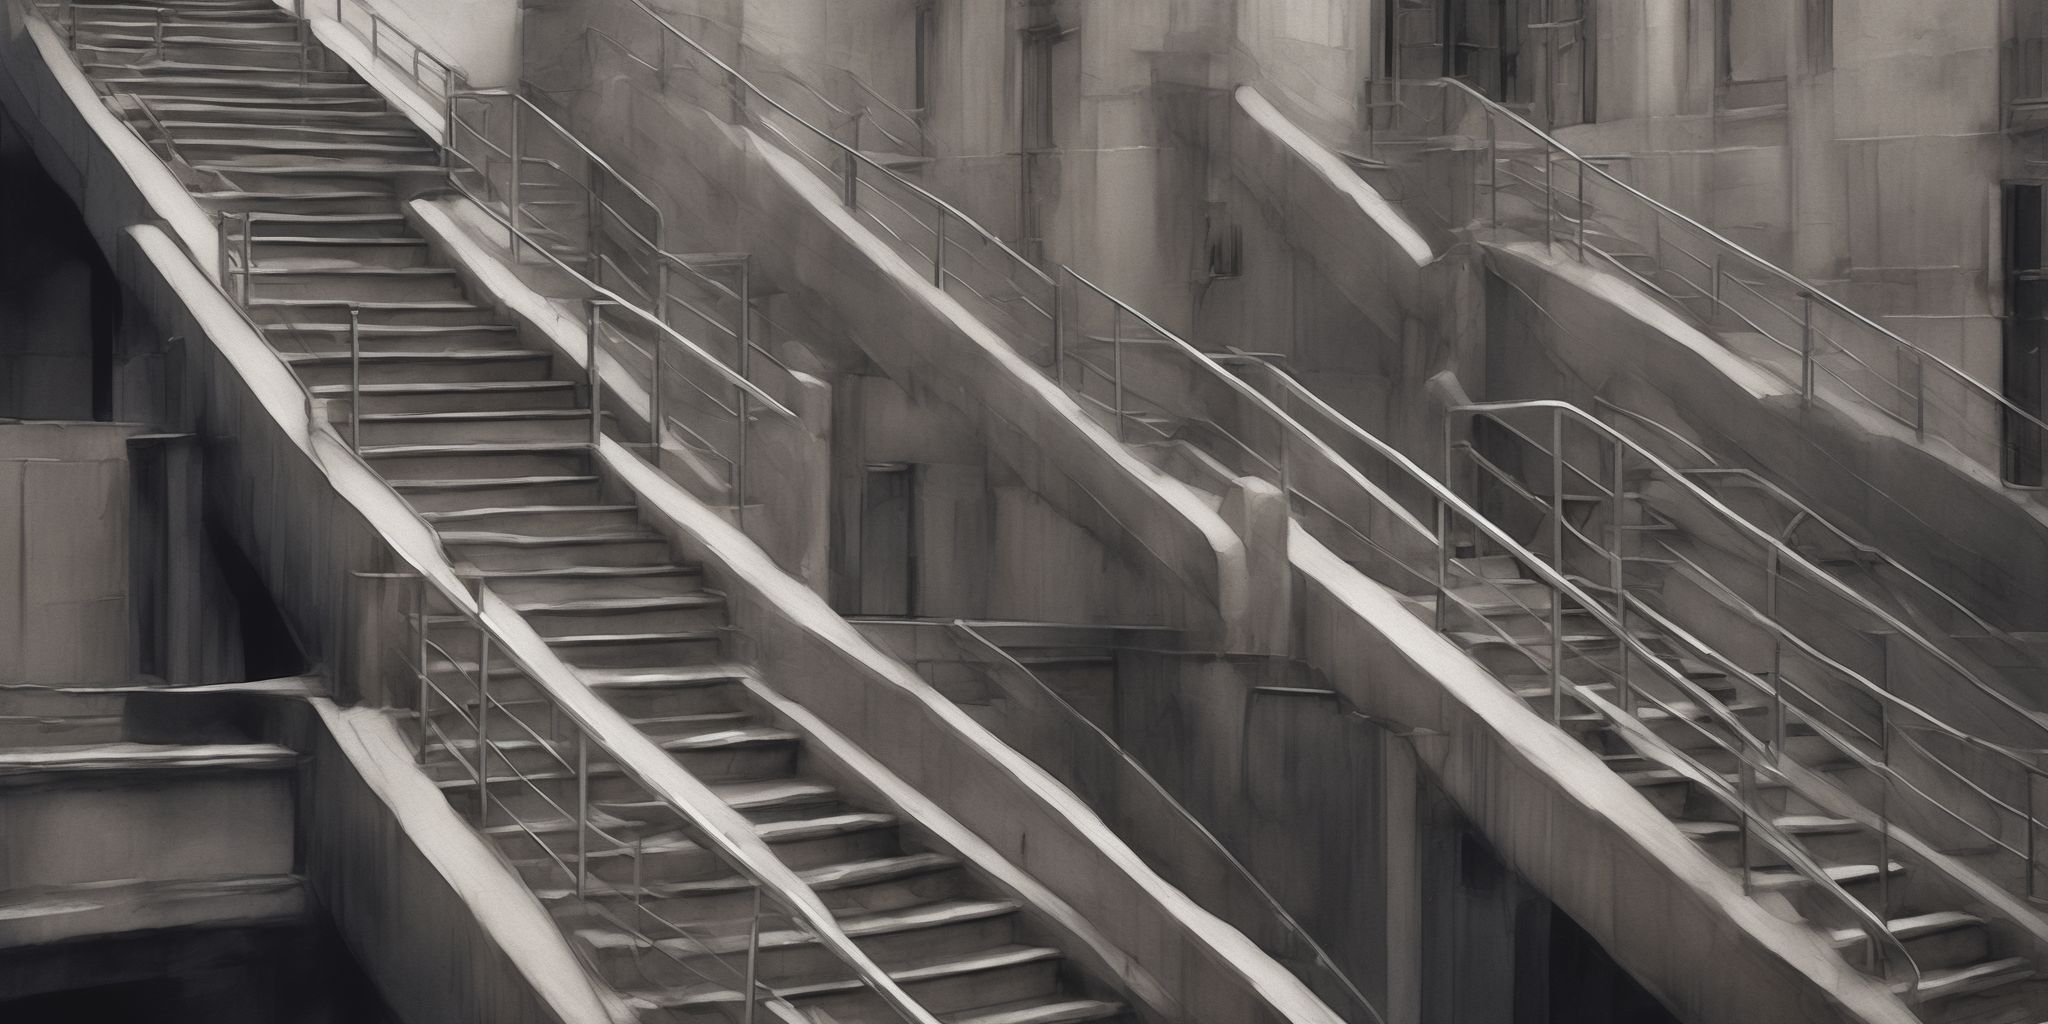 Stairs  in realistic, photographic style